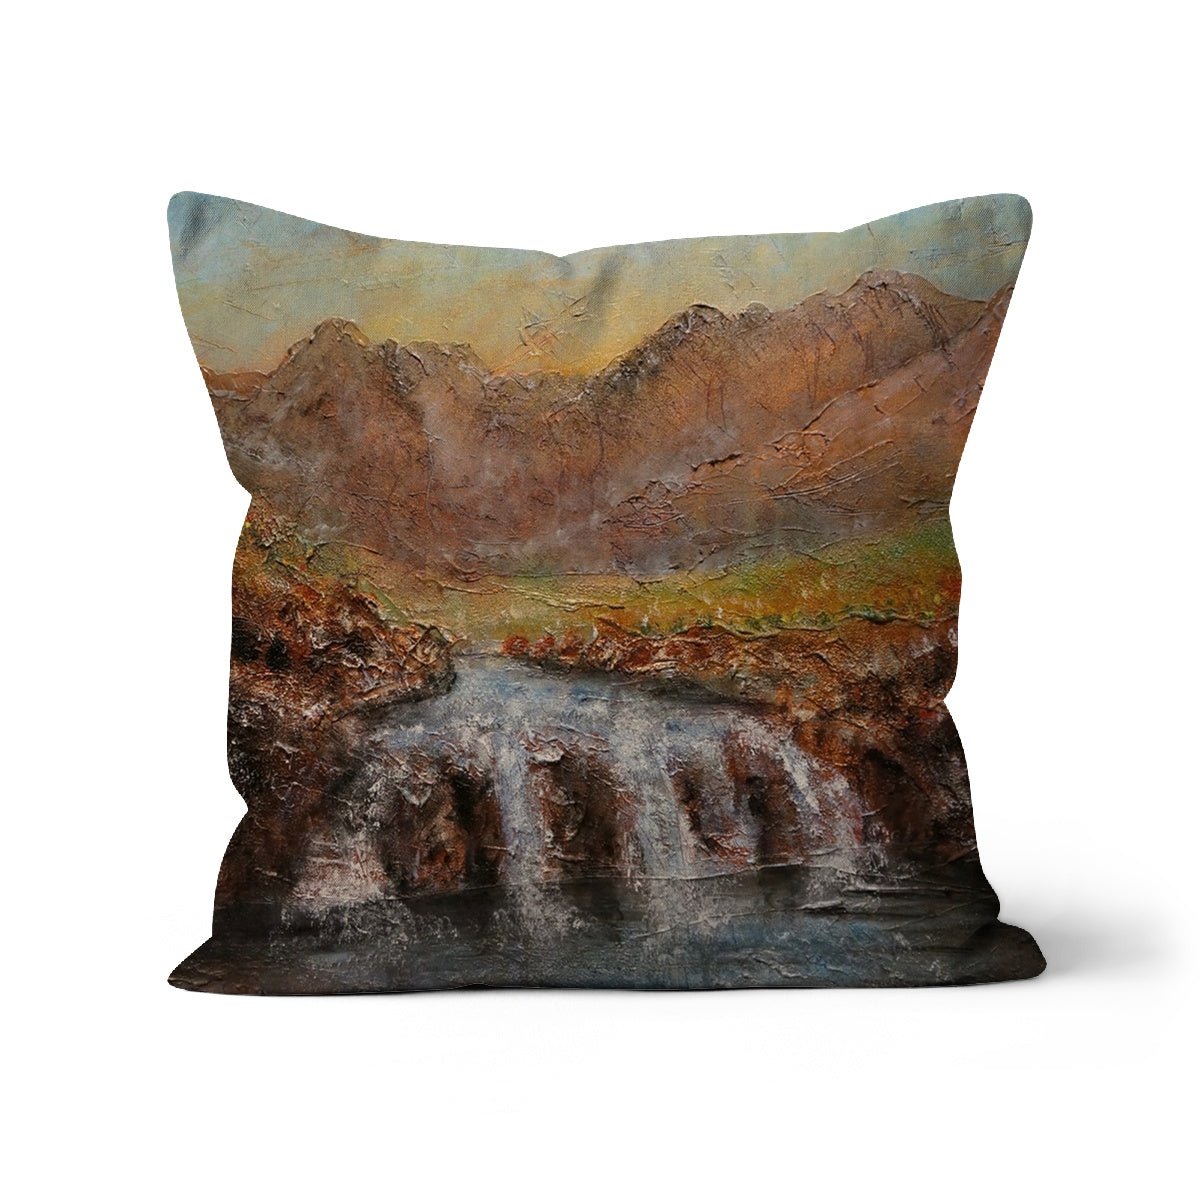 Fairy Pools Dawn Skye Art Gifts Cushion-Cushions-Skye Art Gallery-Faux Suede-24"x24"-Paintings, Prints, Homeware, Art Gifts From Scotland By Scottish Artist Kevin Hunter